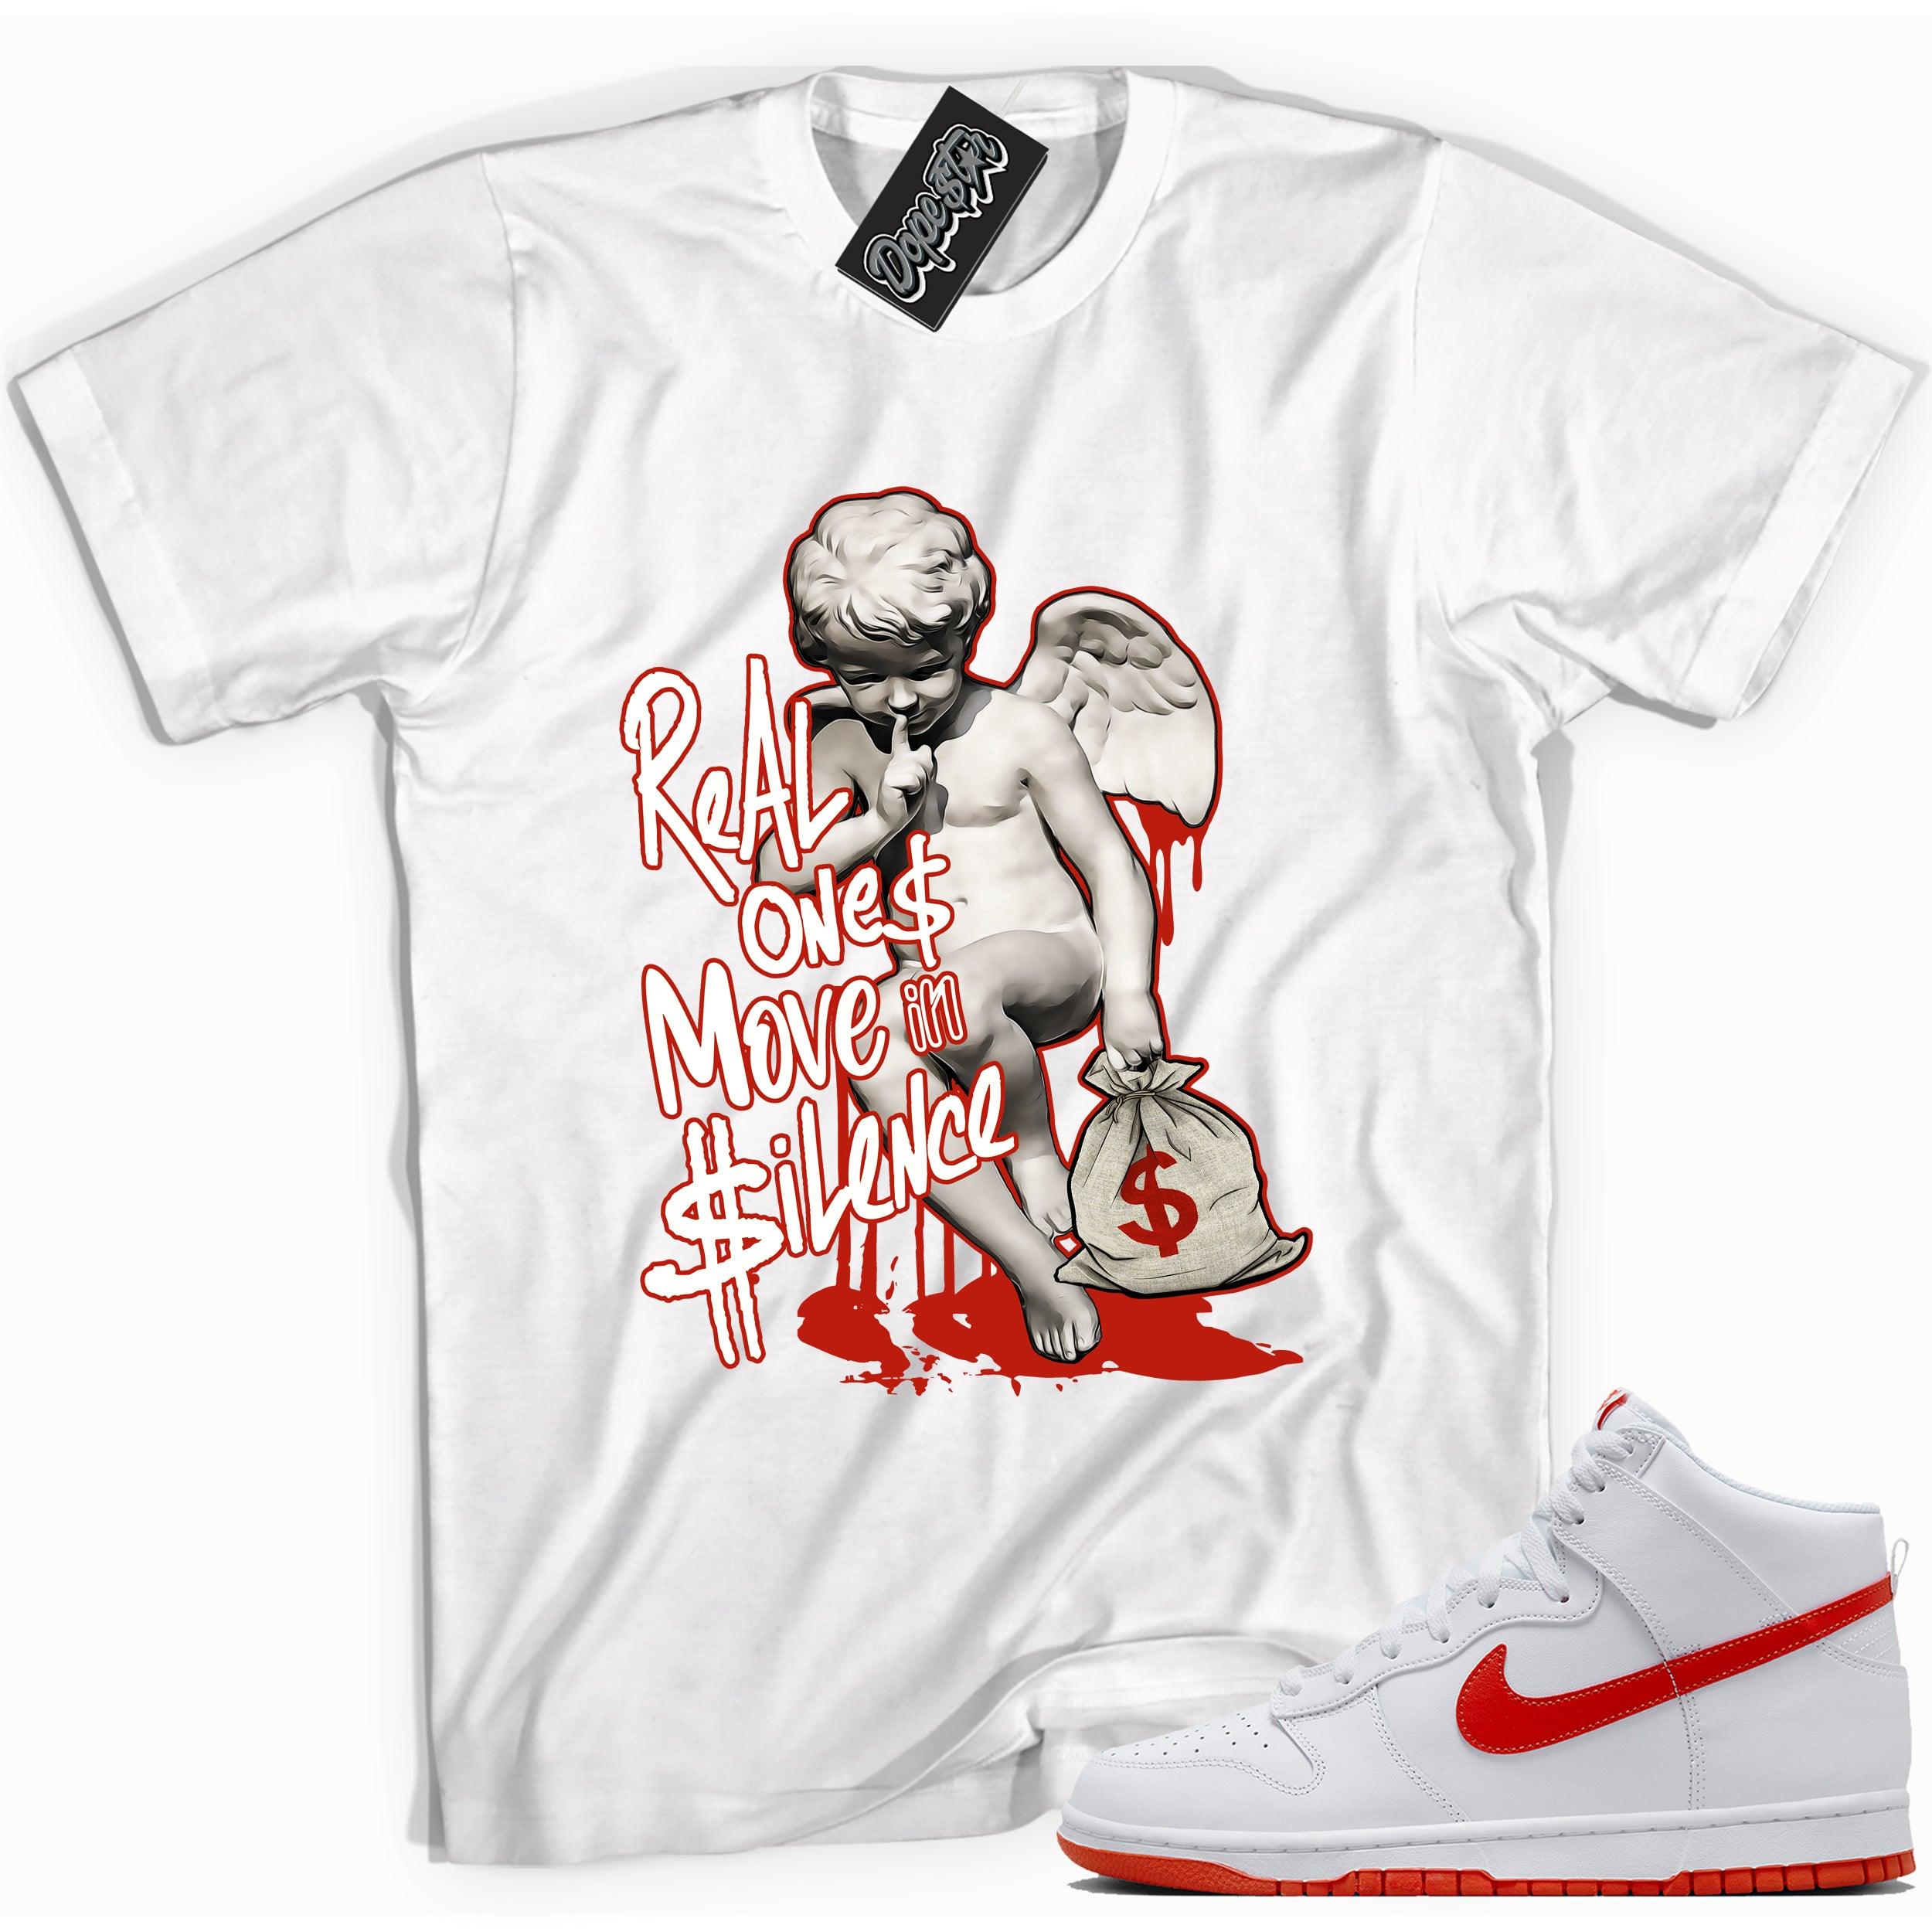 Cool white graphic tee with 'real ones in silence' print, that perfectly matches Nike Dunk High White Picante Red sneakers.